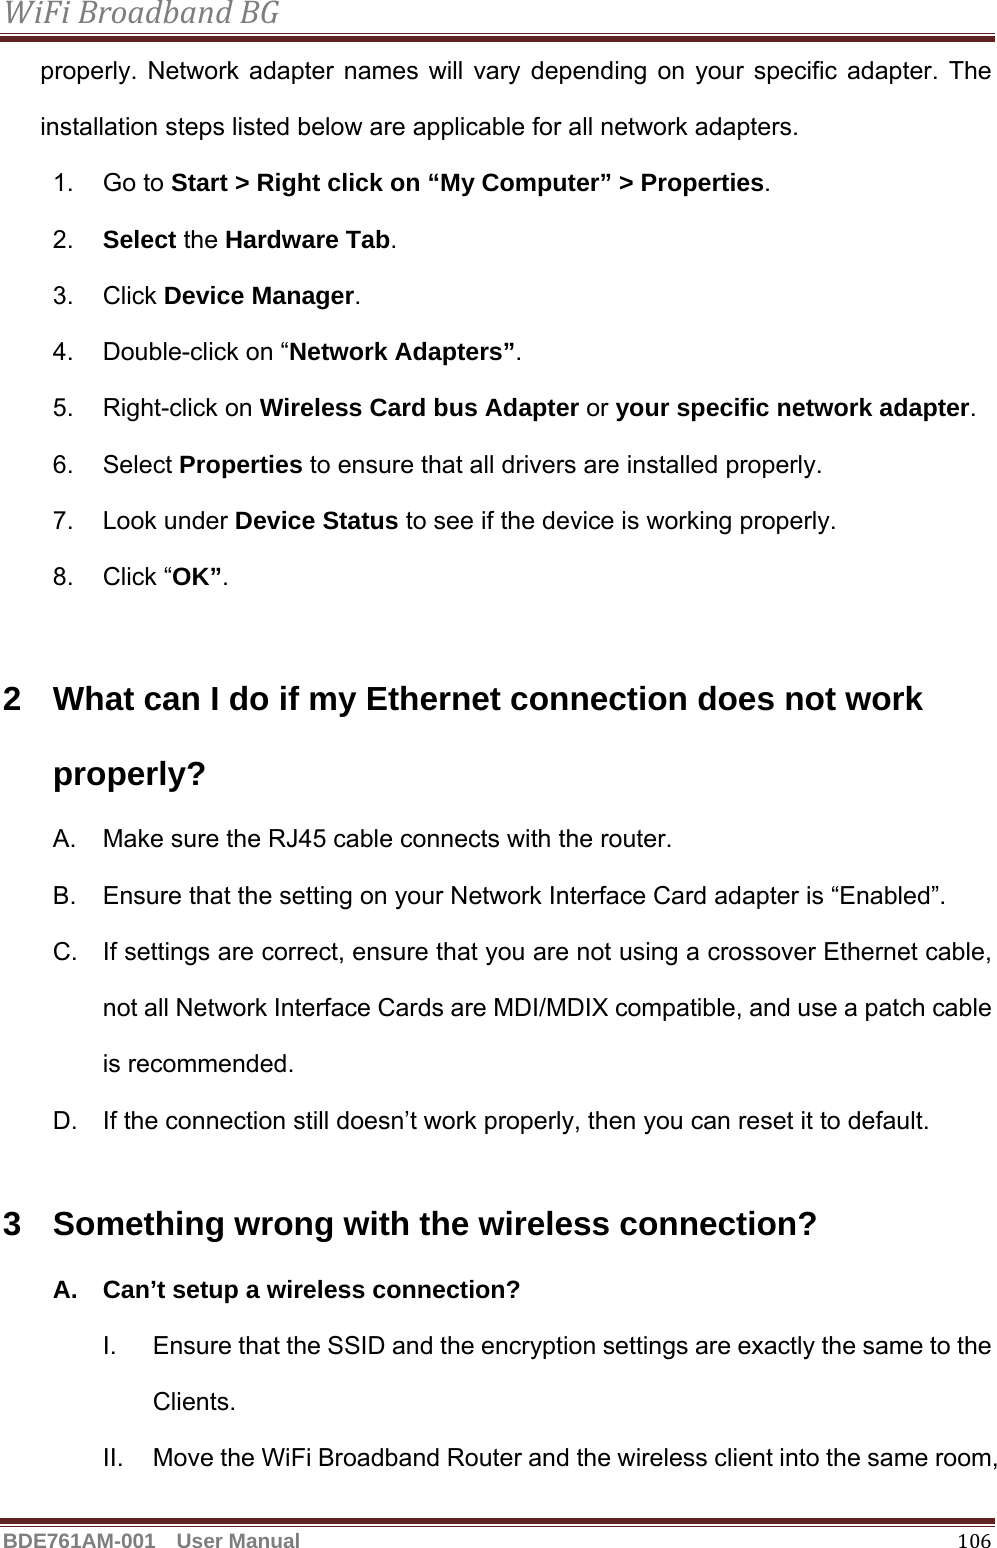 WiFiBroadbandBGBDE761AM-001  User Manual   106properly. Network adapter names will vary depending on your specific adapter. The installation steps listed below are applicable for all network adapters. 1. Go to Start &gt; Right click on “My Computer” &gt; Properties. 2.  Select the Hardware Tab. 3. Click Device Manager. 4.  Double-click on “Network Adapters”. 5. Right-click on Wireless Card bus Adapter or your specific network adapter. 6. Select Properties to ensure that all drivers are installed properly. 7. Look under Device Status to see if the device is working properly. 8. Click “OK”.  2  What can I do if my Ethernet connection does not work properly? A.  Make sure the RJ45 cable connects with the router. B.  Ensure that the setting on your Network Interface Card adapter is “Enabled”. C.  If settings are correct, ensure that you are not using a crossover Ethernet cable, not all Network Interface Cards are MDI/MDIX compatible, and use a patch cable is recommended. D.  If the connection still doesn’t work properly, then you can reset it to default.      3  Something wrong with the wireless connection? A.  Can’t setup a wireless connection? I.  Ensure that the SSID and the encryption settings are exactly the same to the Clients.  II.  Move the WiFi Broadband Router and the wireless client into the same room, 